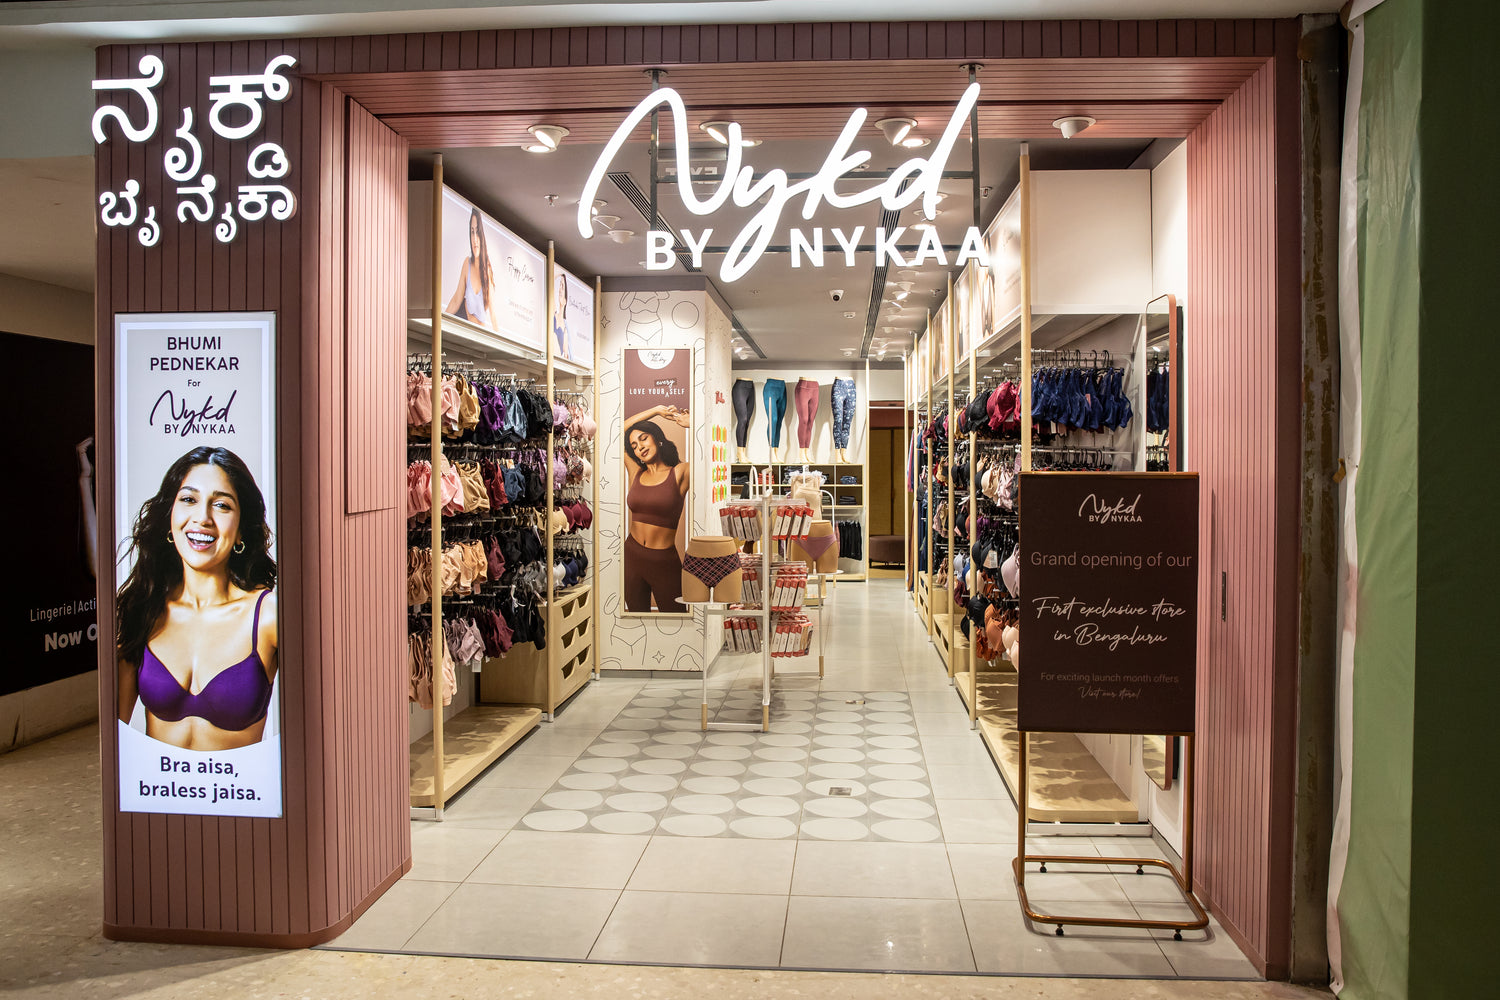 Nykd by Nykaa opens in Hyderabad - Images Business of Fashion